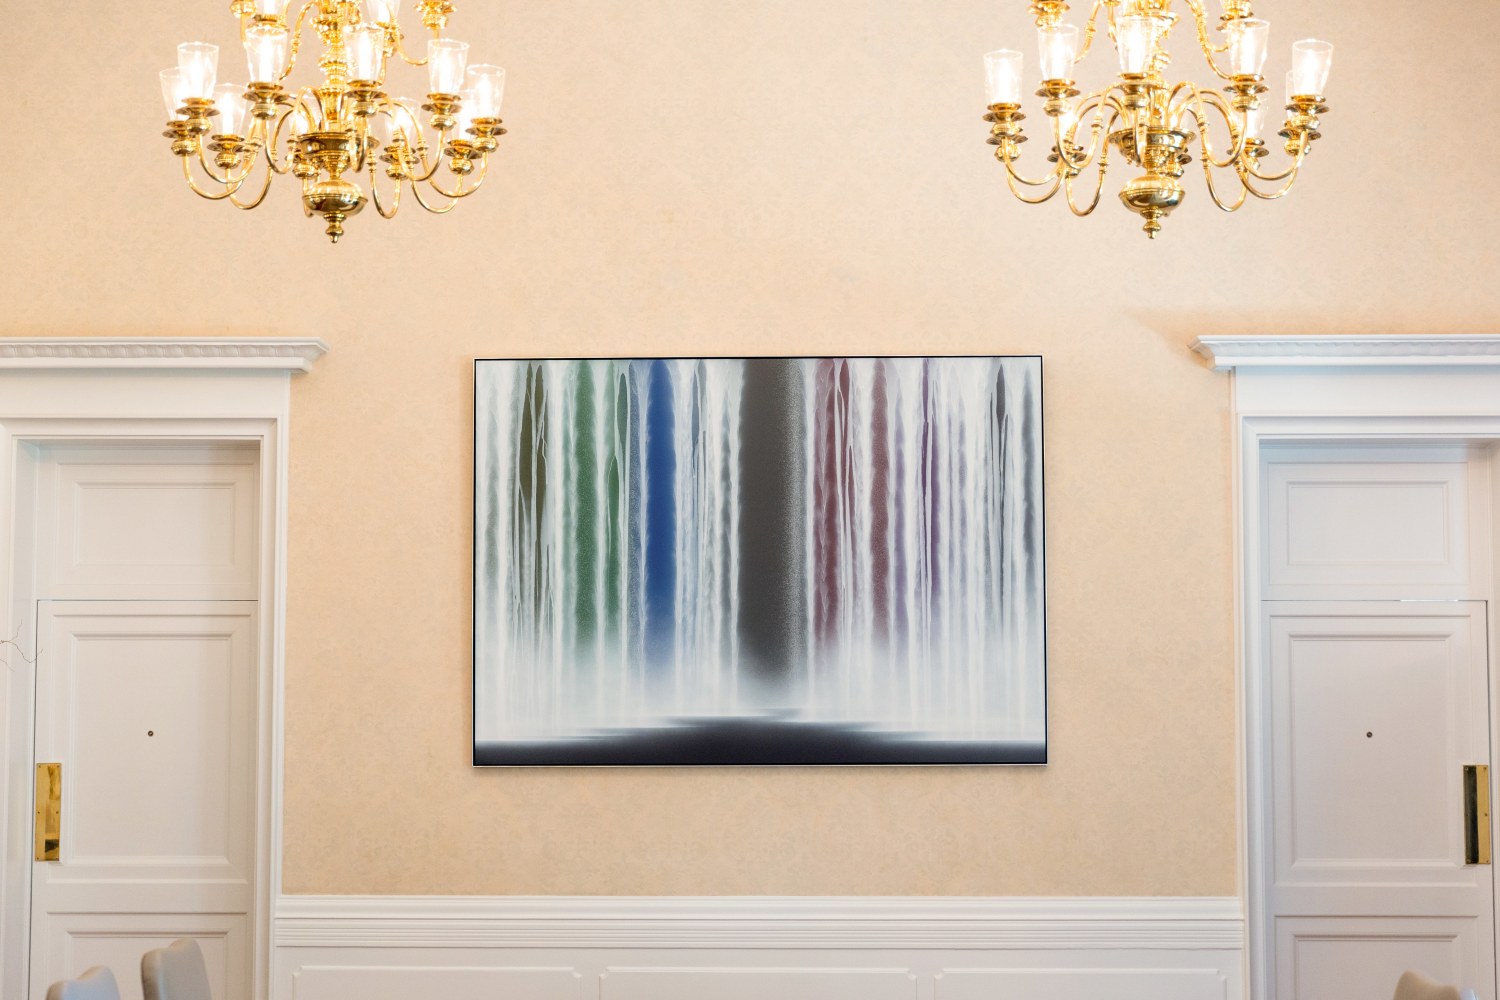 For the large conference hall, I painted Waterfall on Colors, its concept is that the world is filled with diversity.